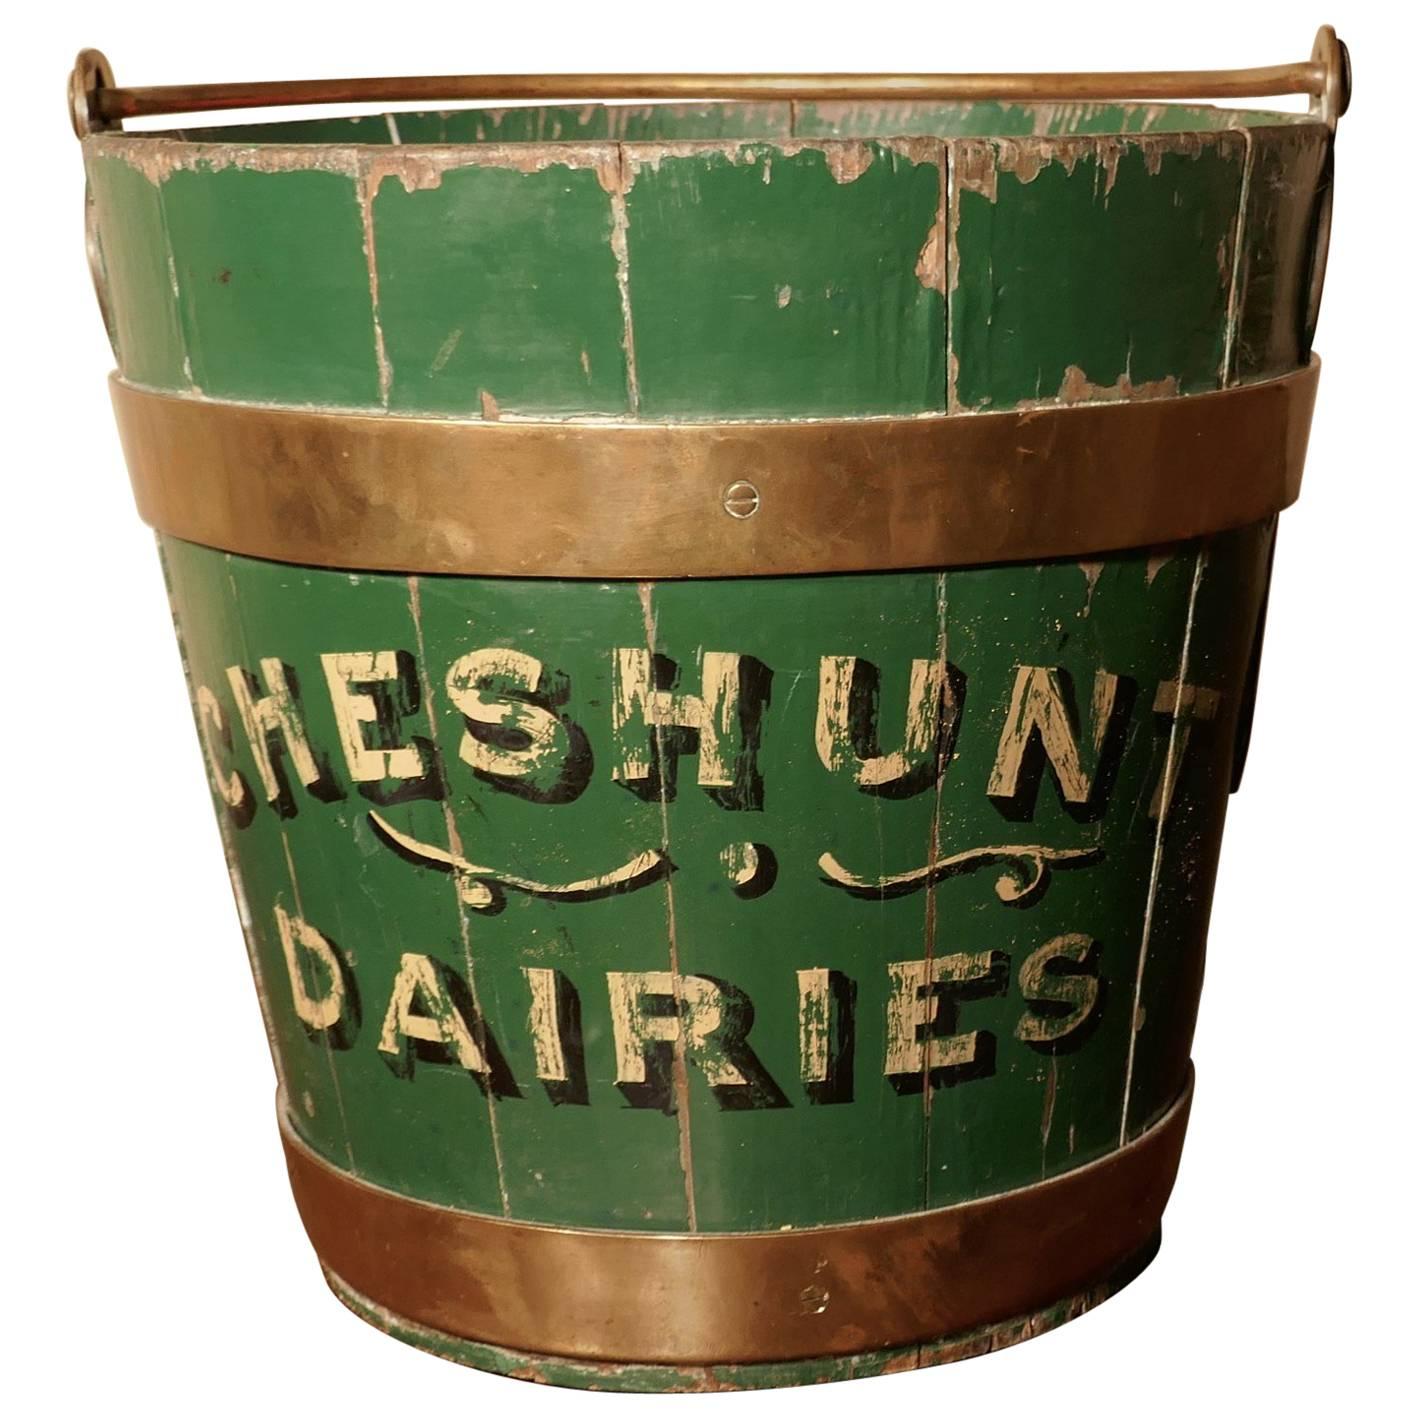 19th Century Painted and Brass Dairy Bucket or Milk Pail